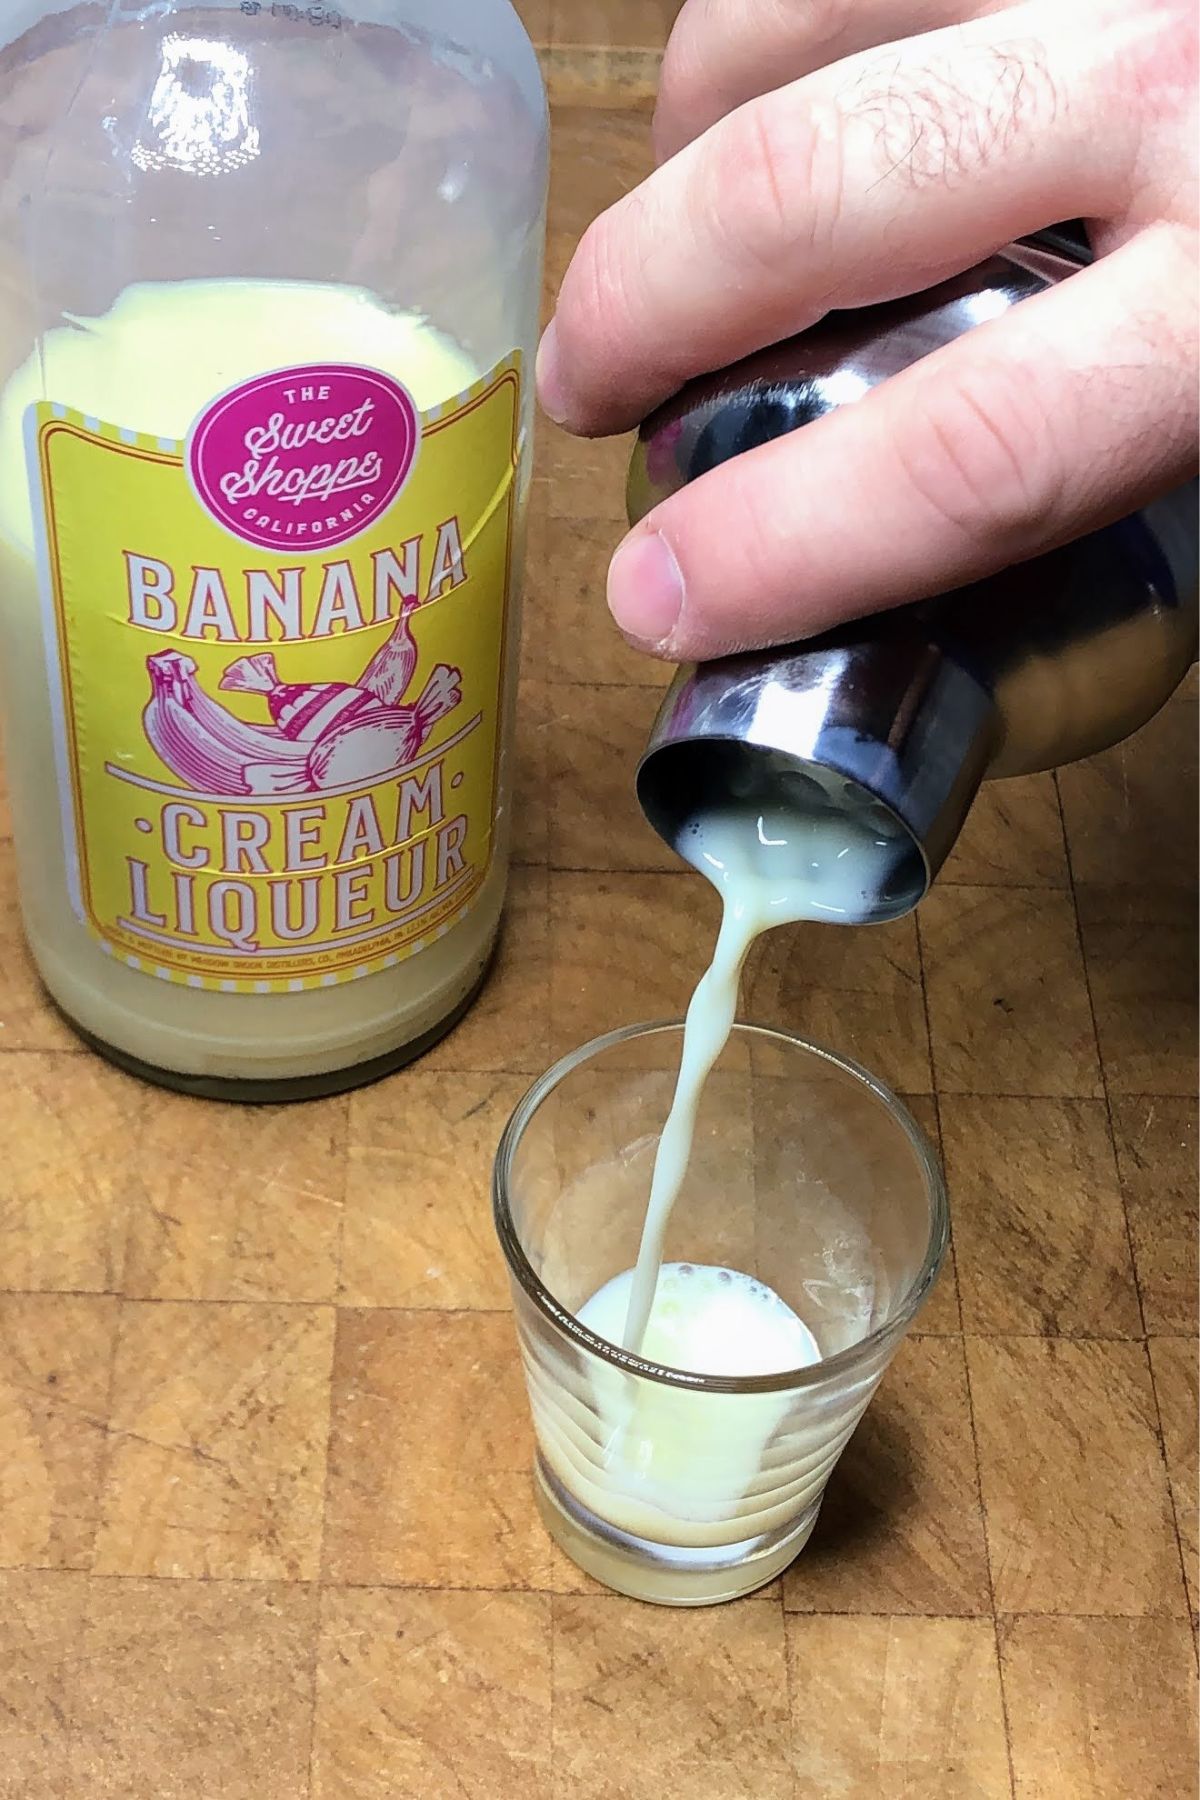 Pouring banana liqueur from shaker into shot glass.